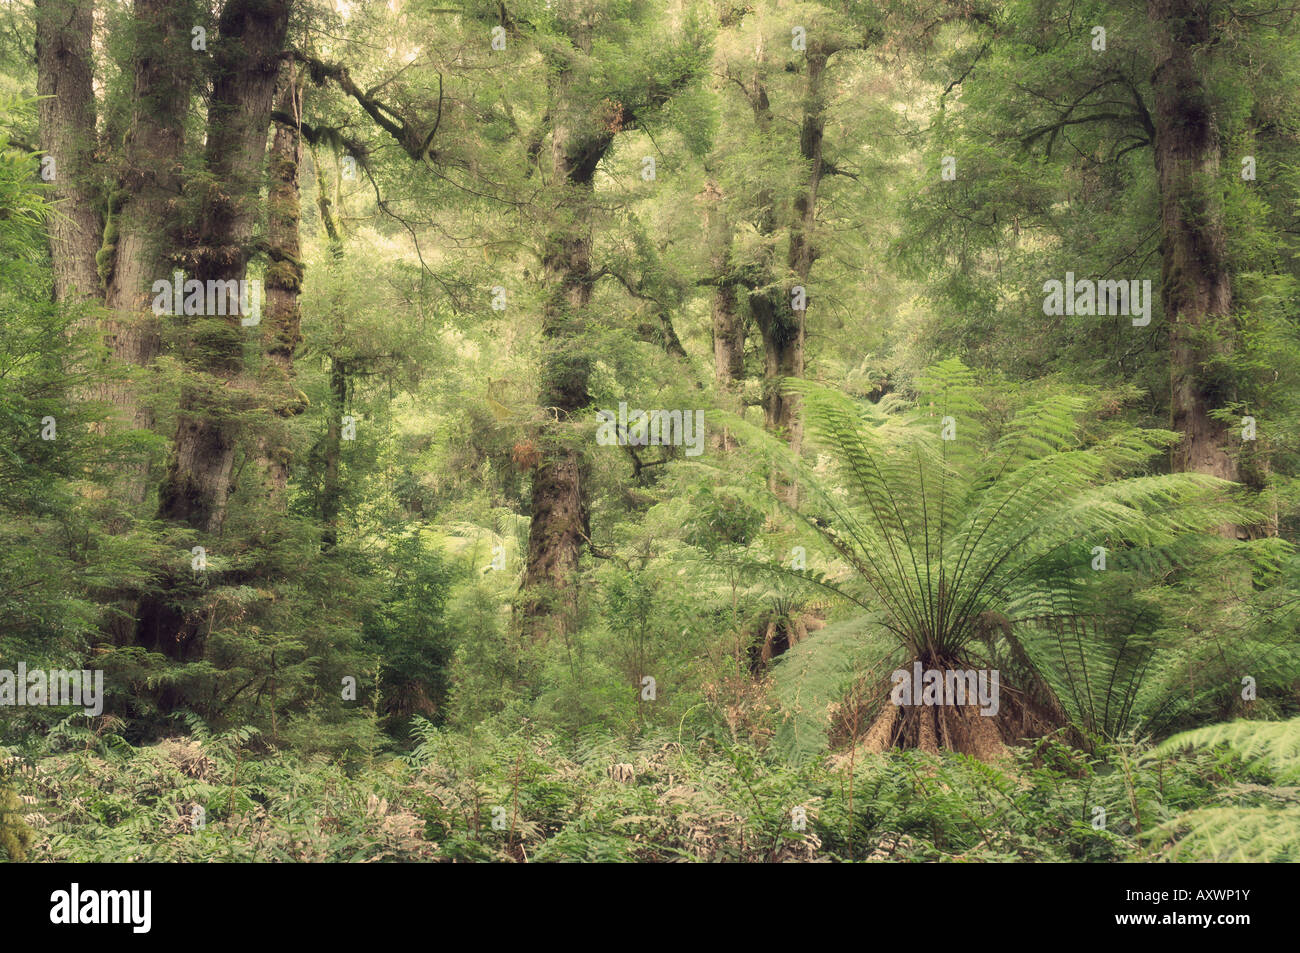 Tree ferns and myrtle beech trees in the temperate rainforest, Yarra Ranges National Park, Victoria, Australia, Pacific Stock Photo